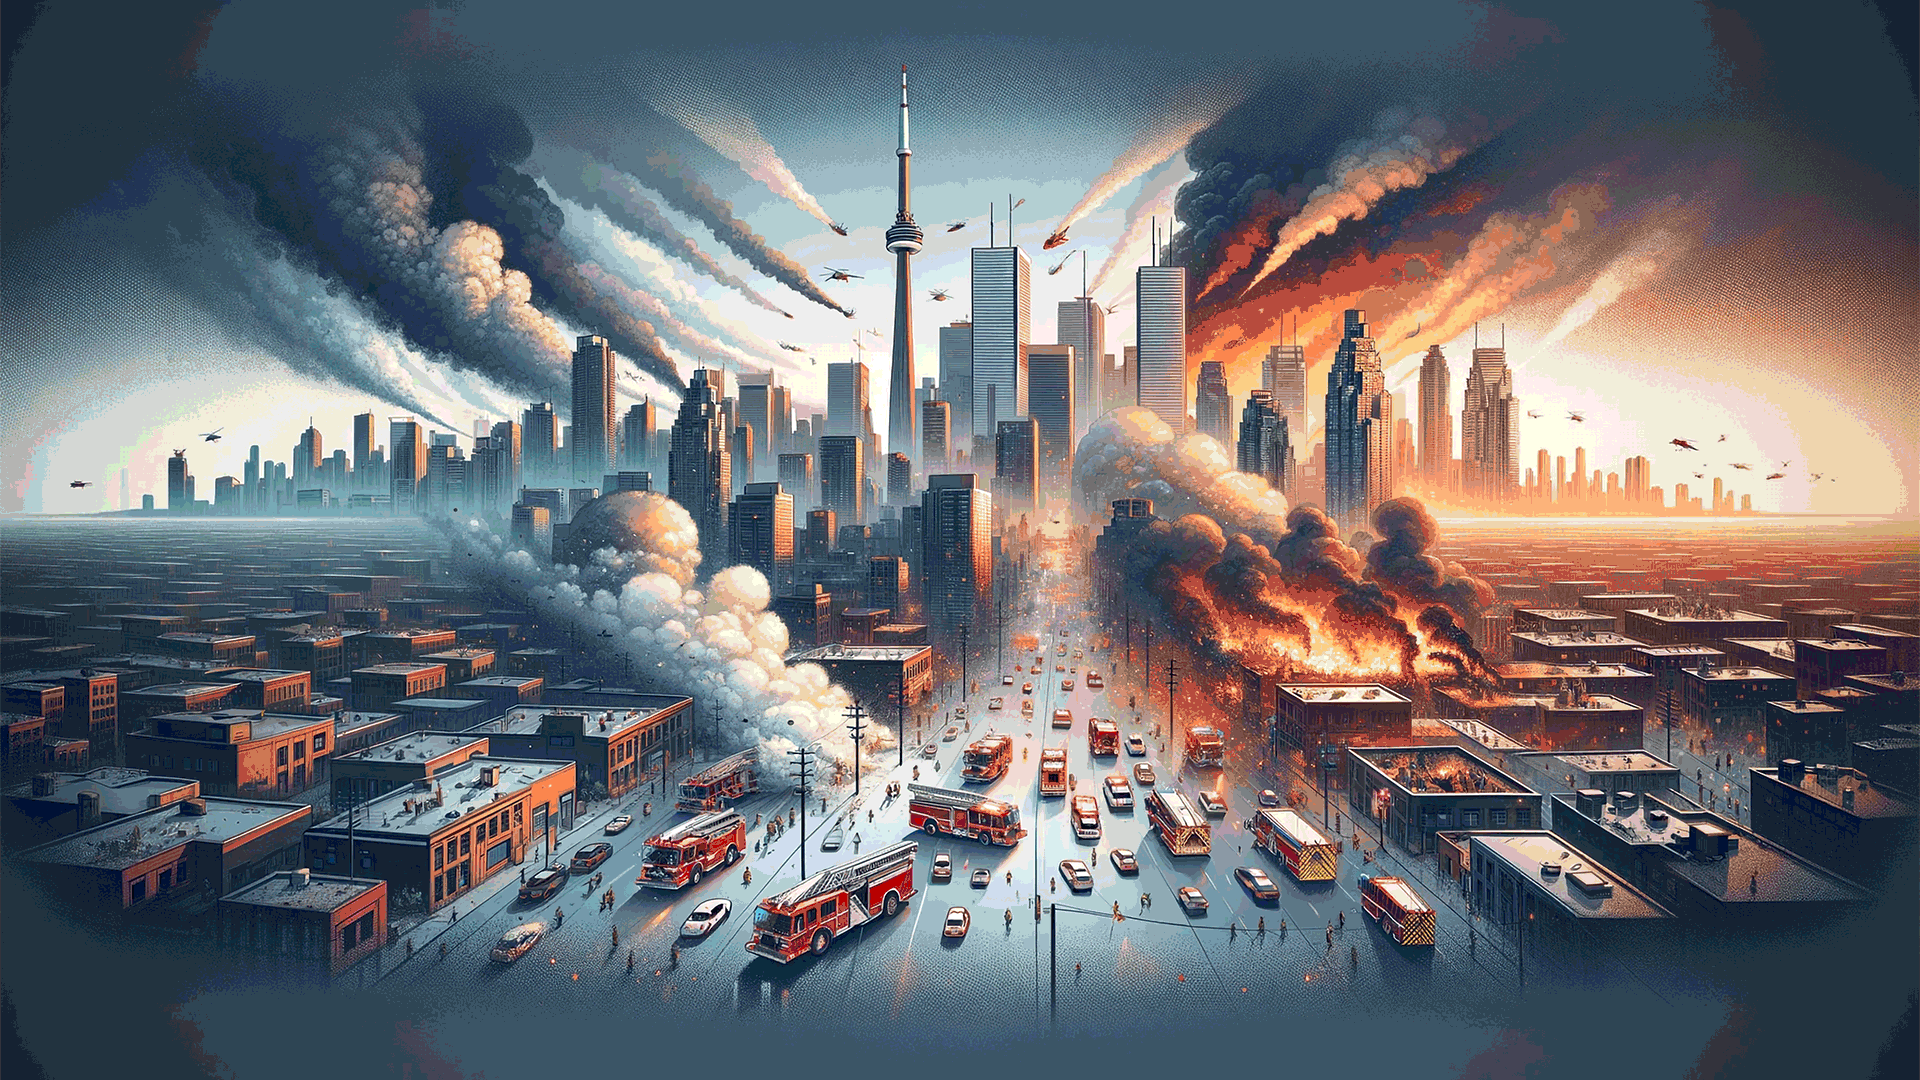 Machine Learning - Toronto Fire Incidents machine learning python